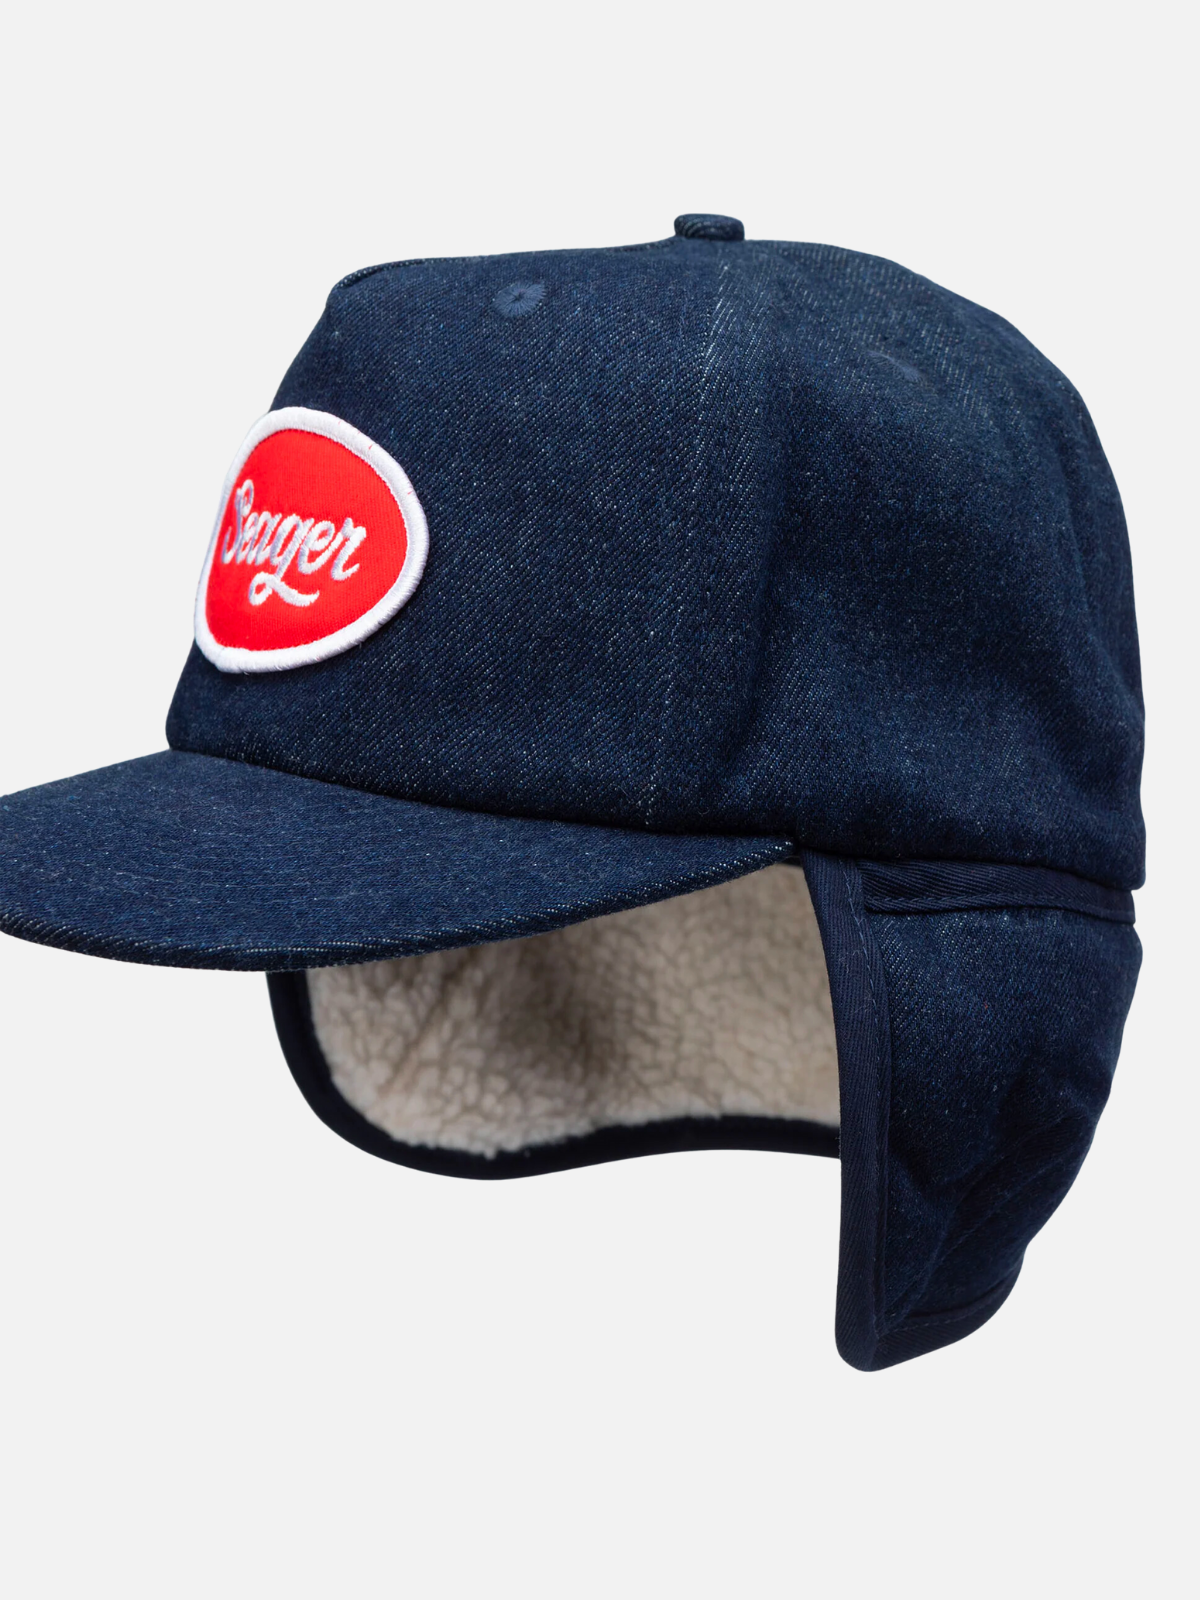 seager russ denim flapjack indigo blue red white brand patch ethically sourced organic sherpa kempt athens ga georgia men's clothing store hats